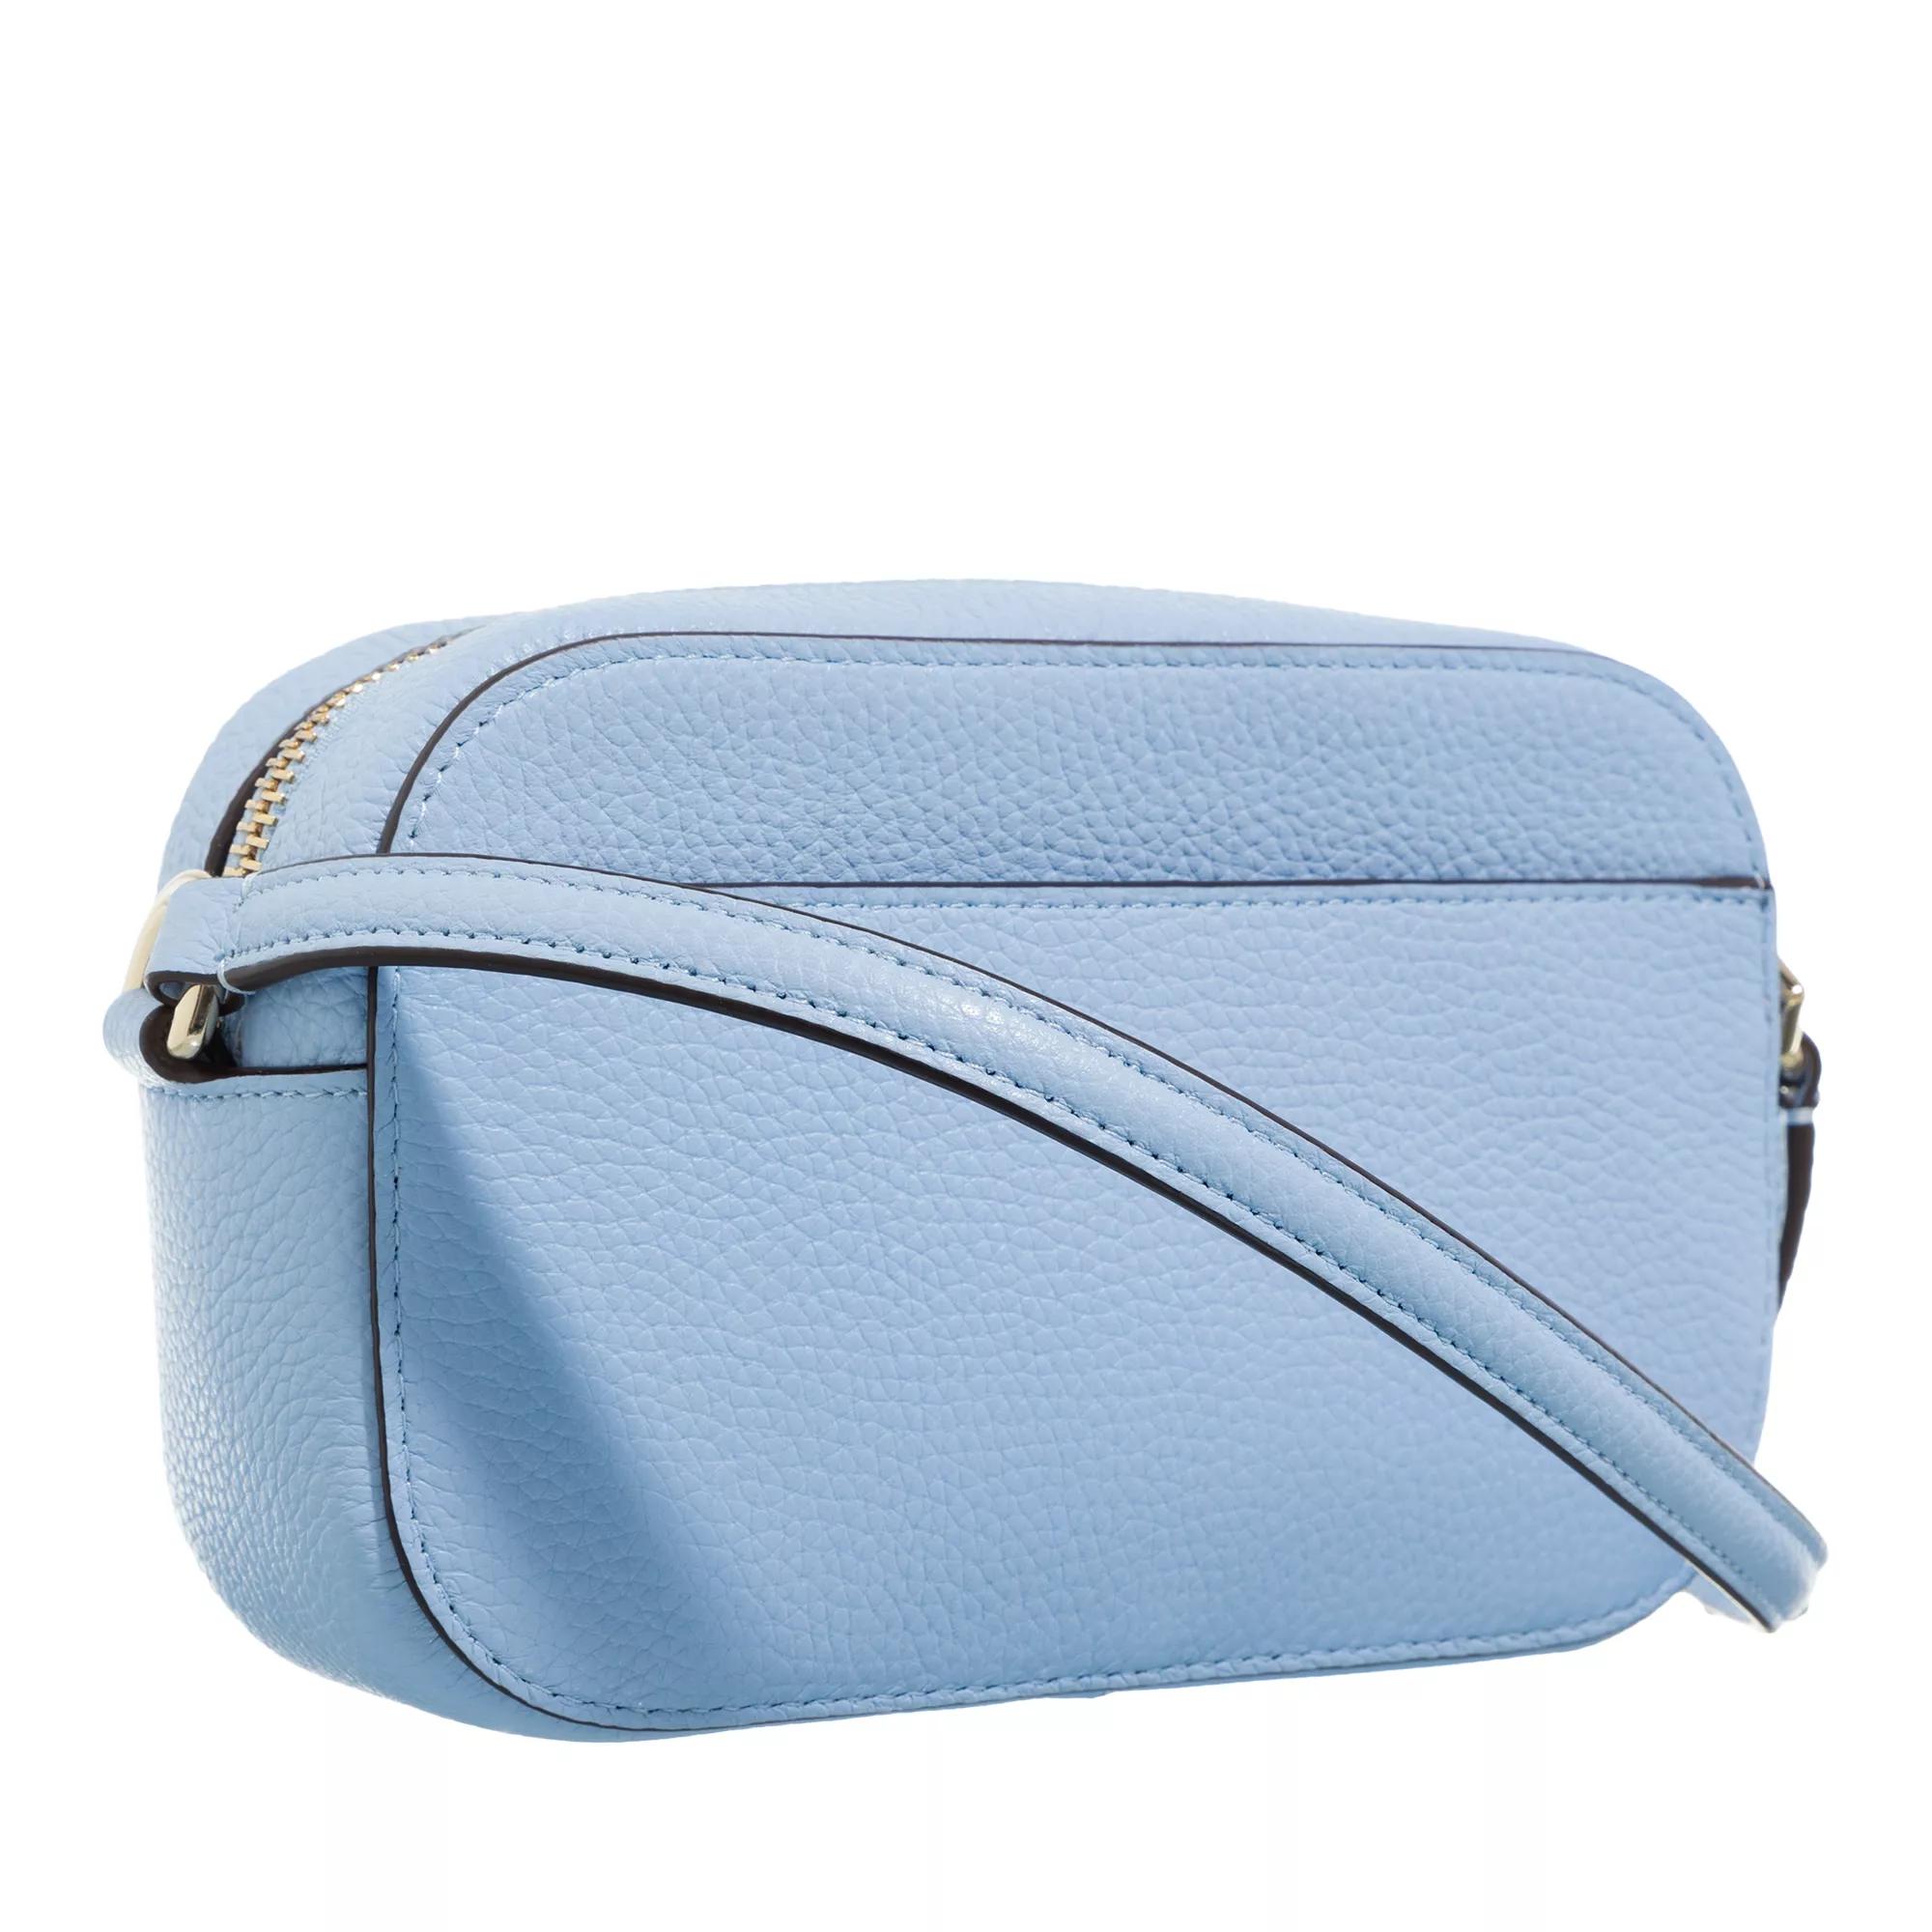 Kate spade new york Crossbody bags Ava Pebbled Leather in blauw